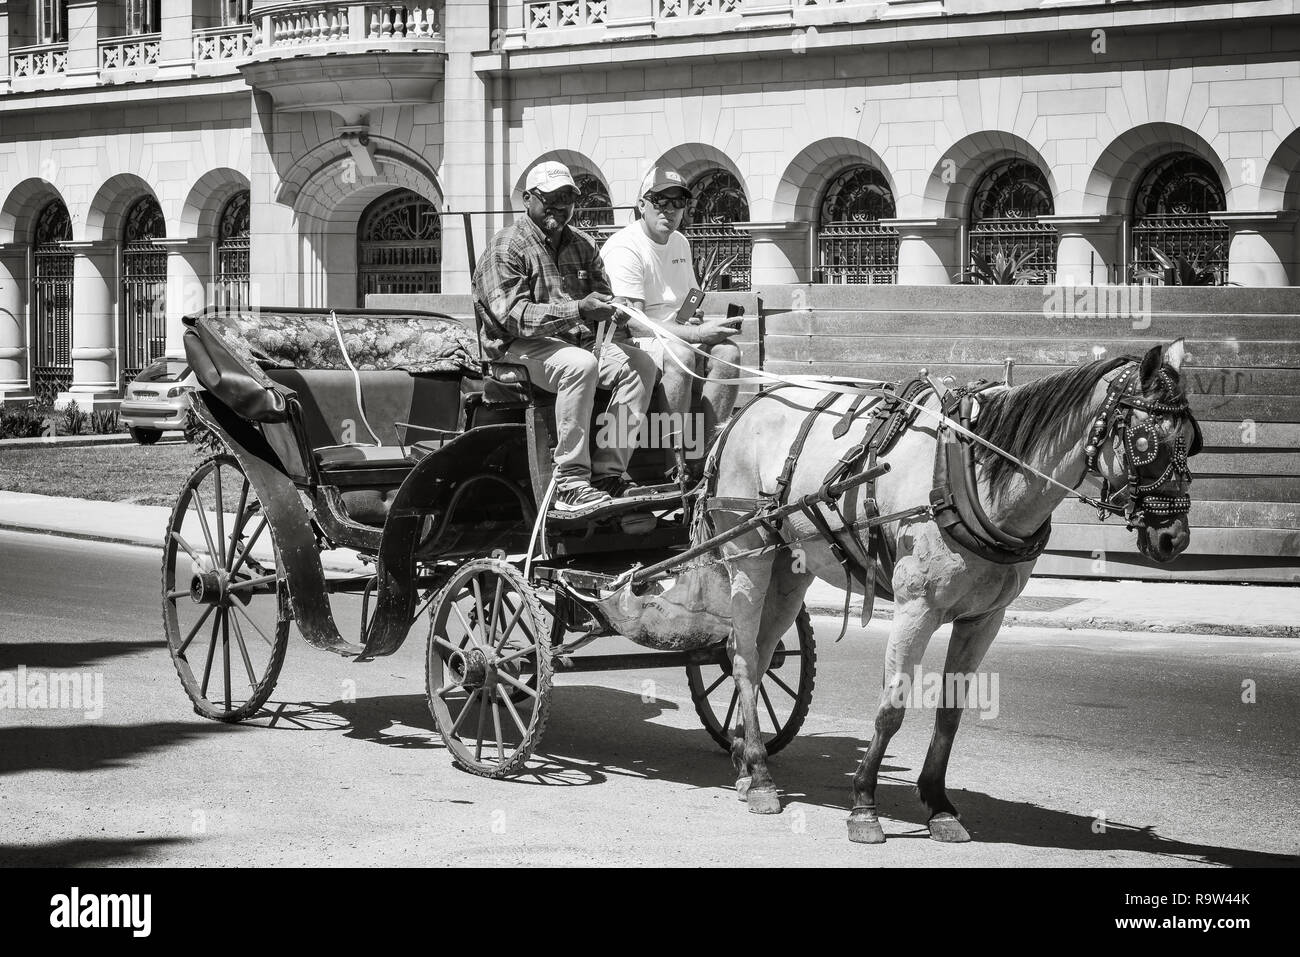 Tourist taking a city tour on a horse carriage in Old Havana, Cuba. Stock Photo